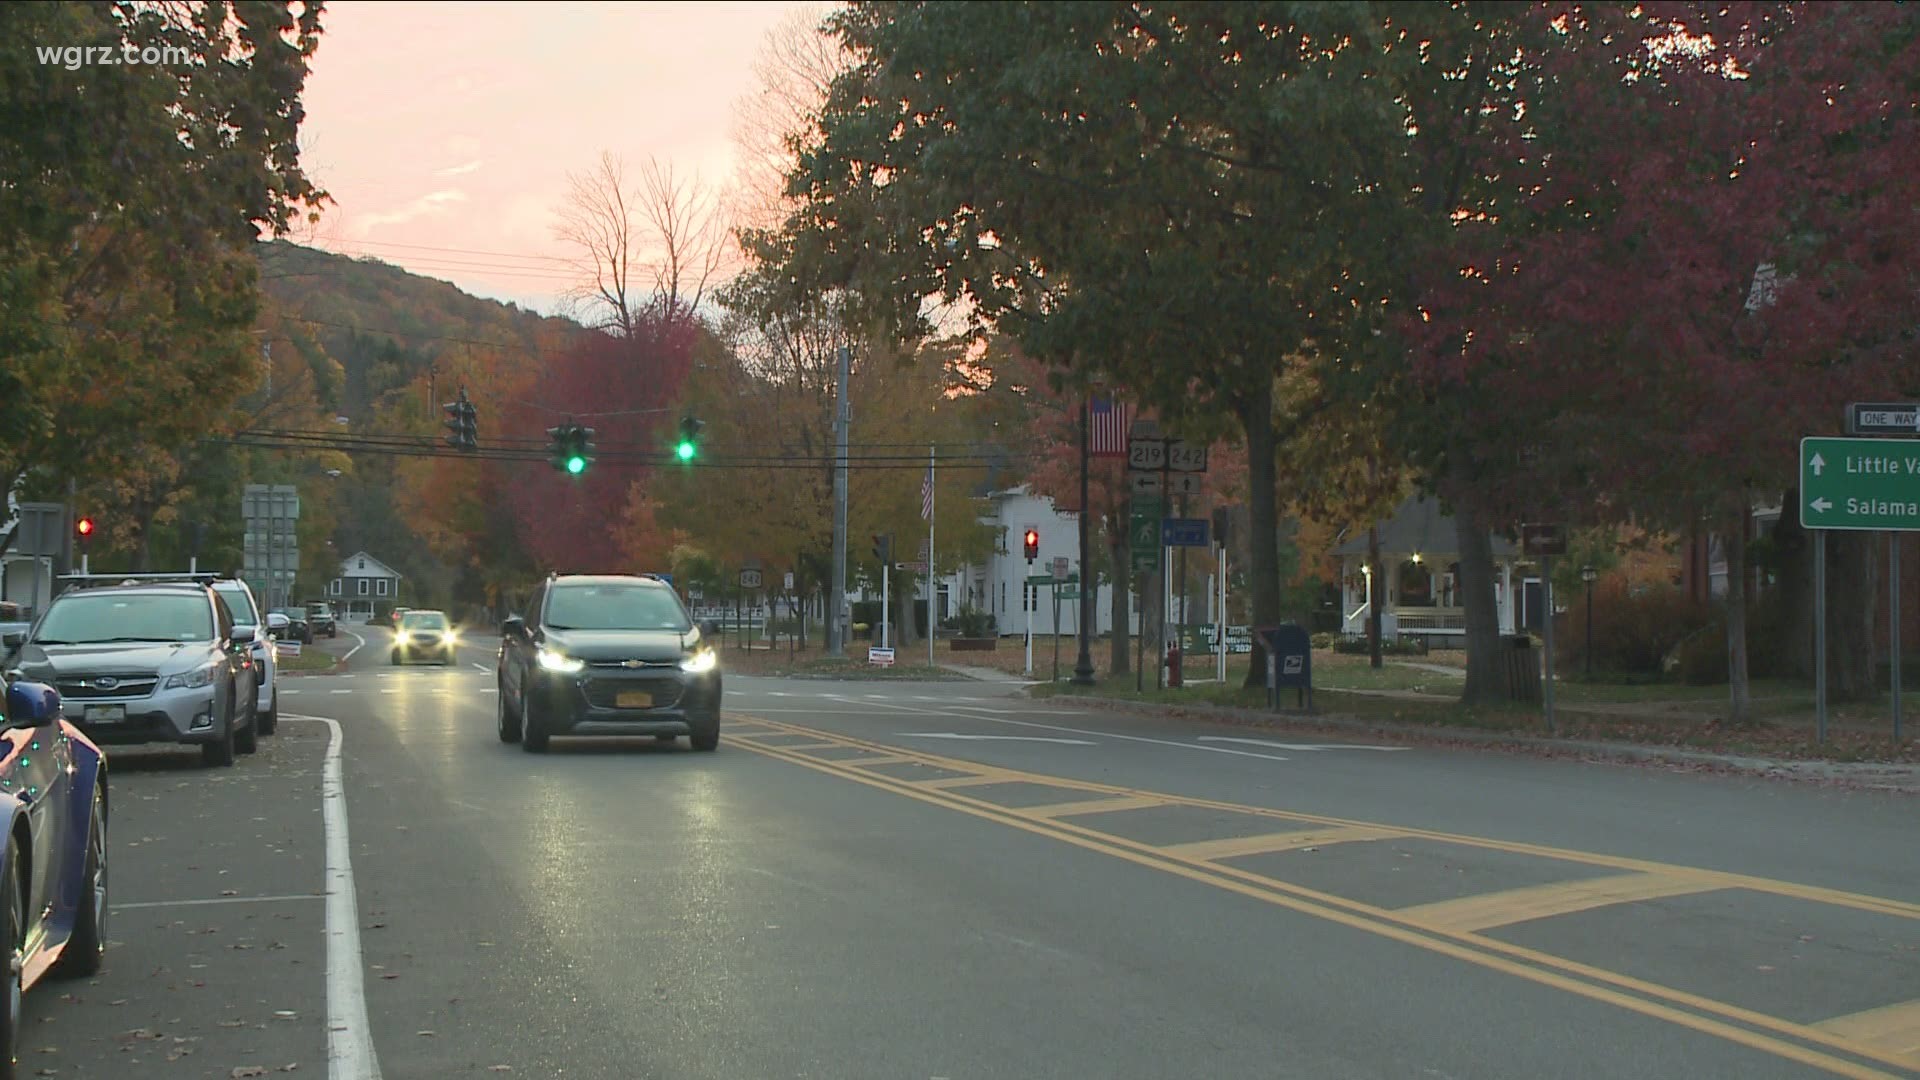 The warm weather has meant more people outdoors and gathering in popular fall places. Ellicottville is also seeing higher than normal traffic.